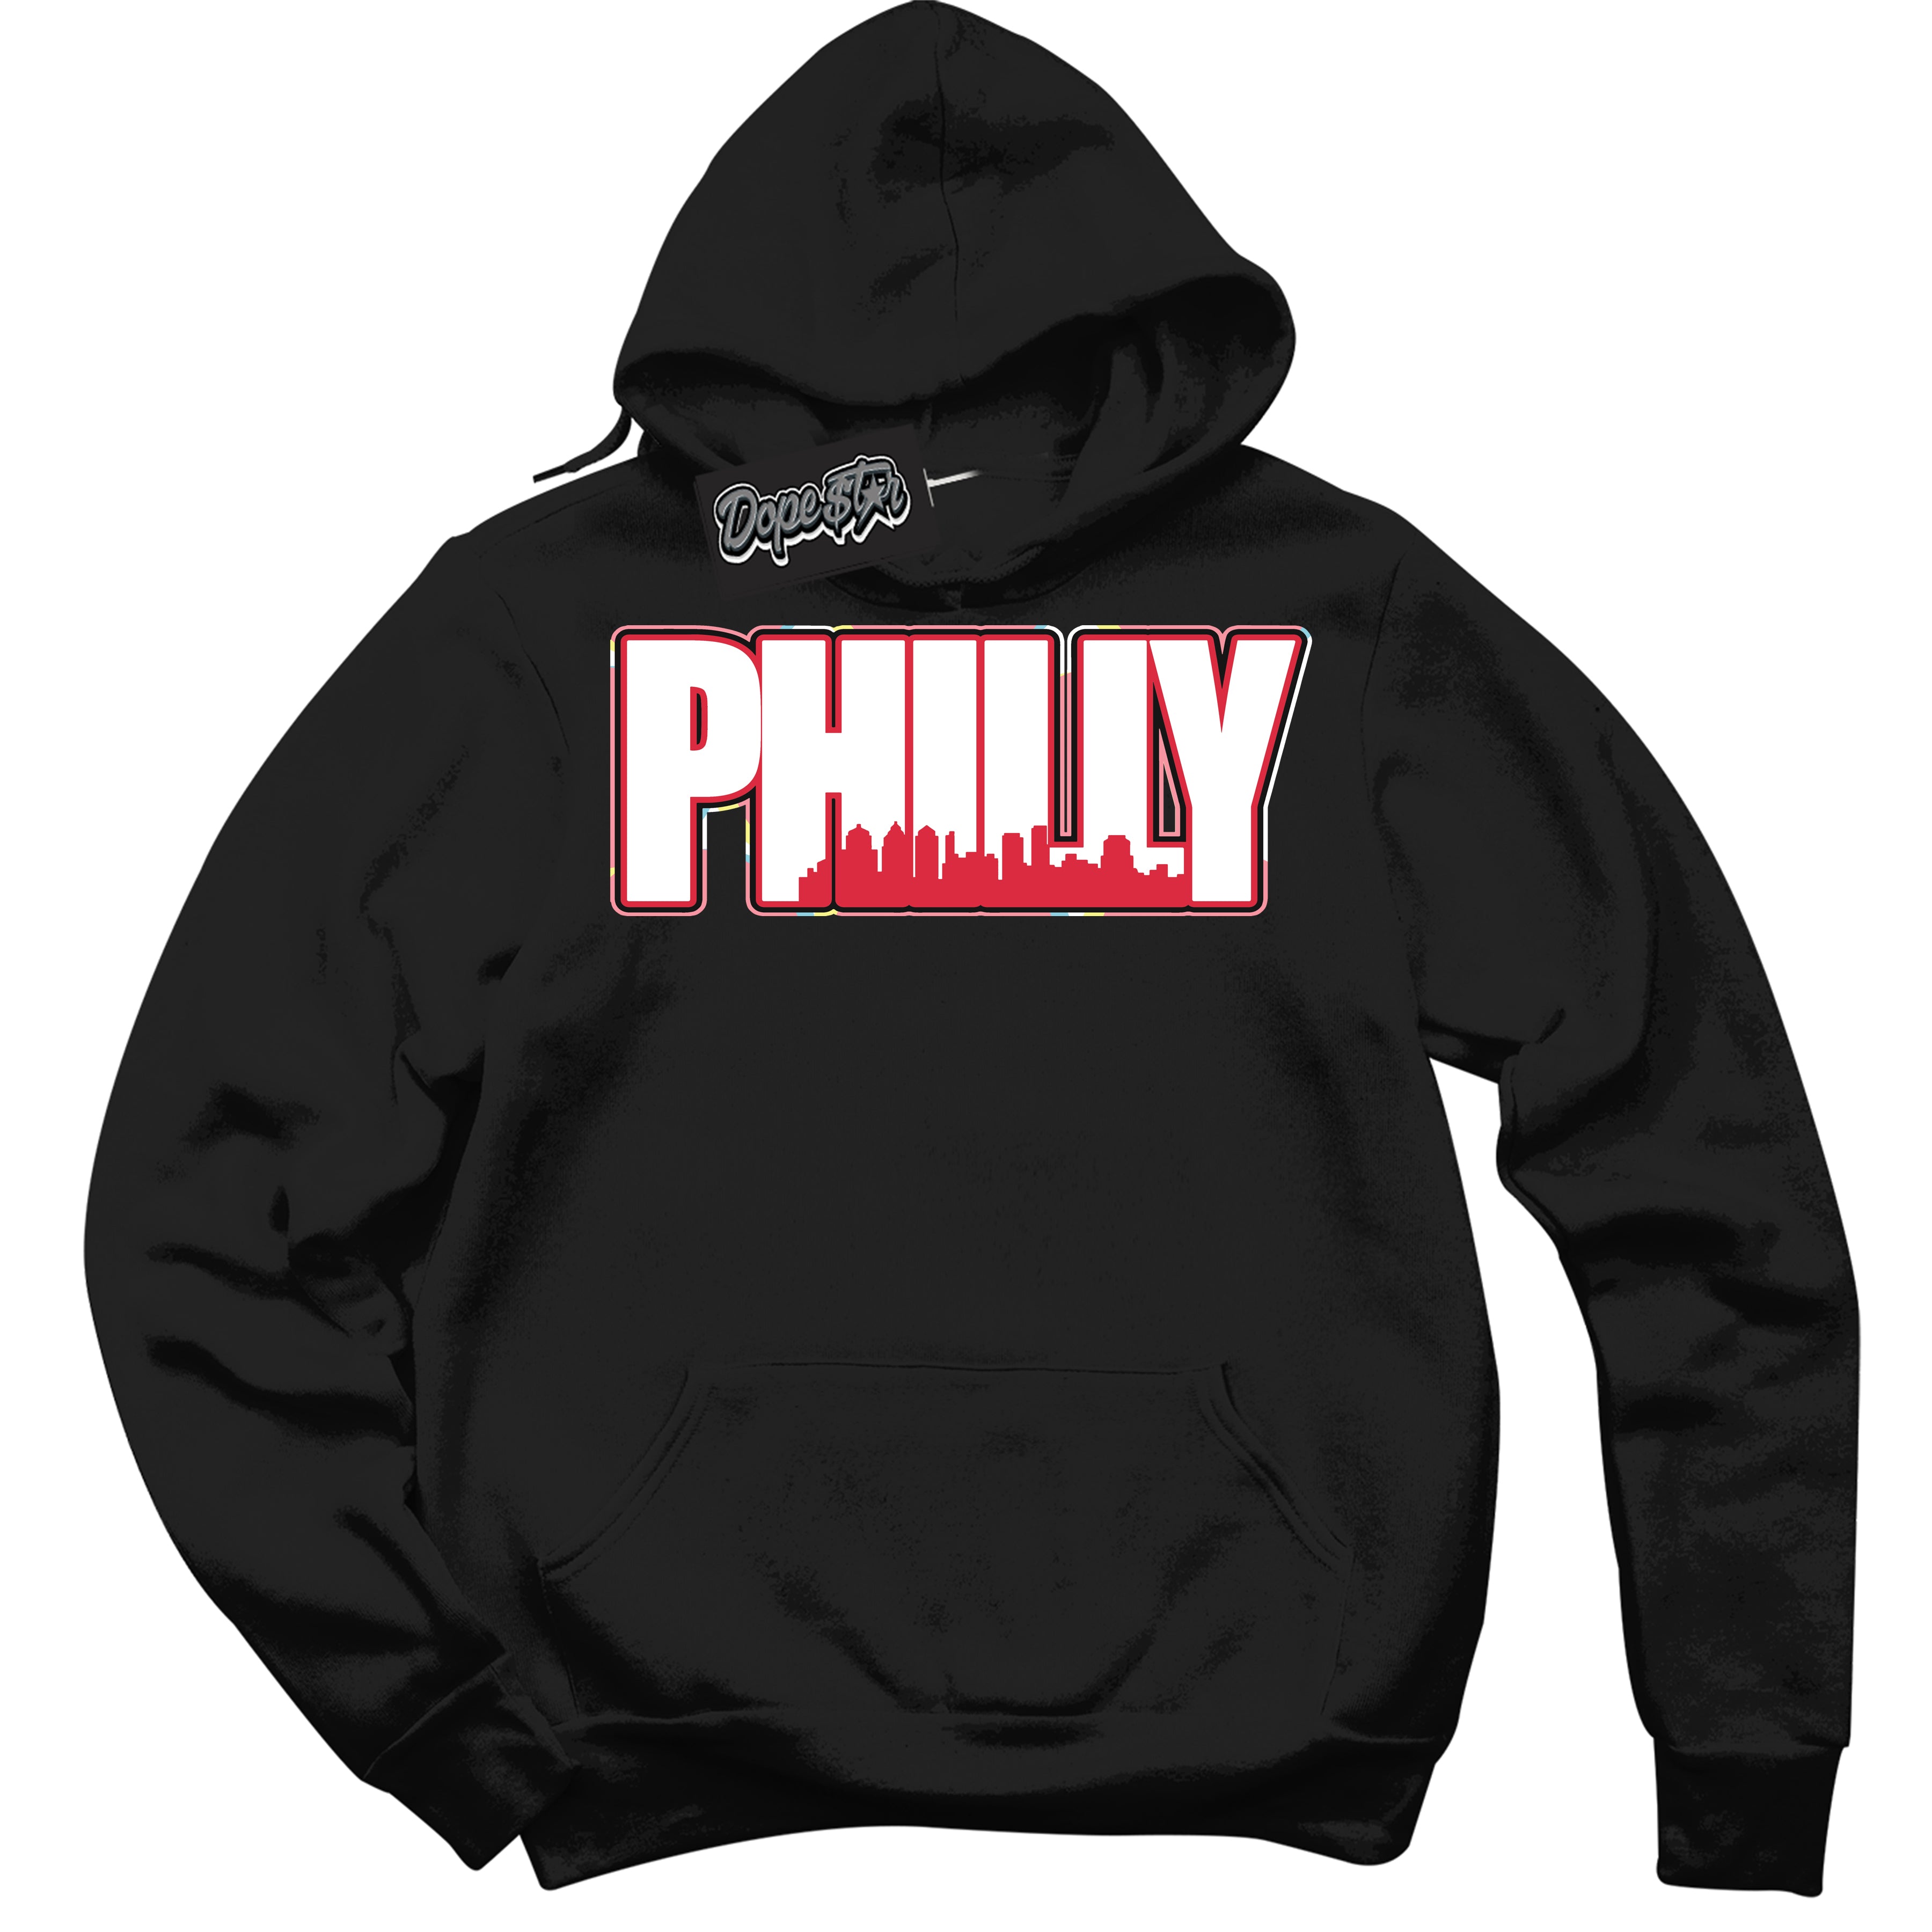 Cool Black Graphic DopeStar Hoodie with “ Philly “ print, that perfectly matches Spider-Verse 1s sneakers